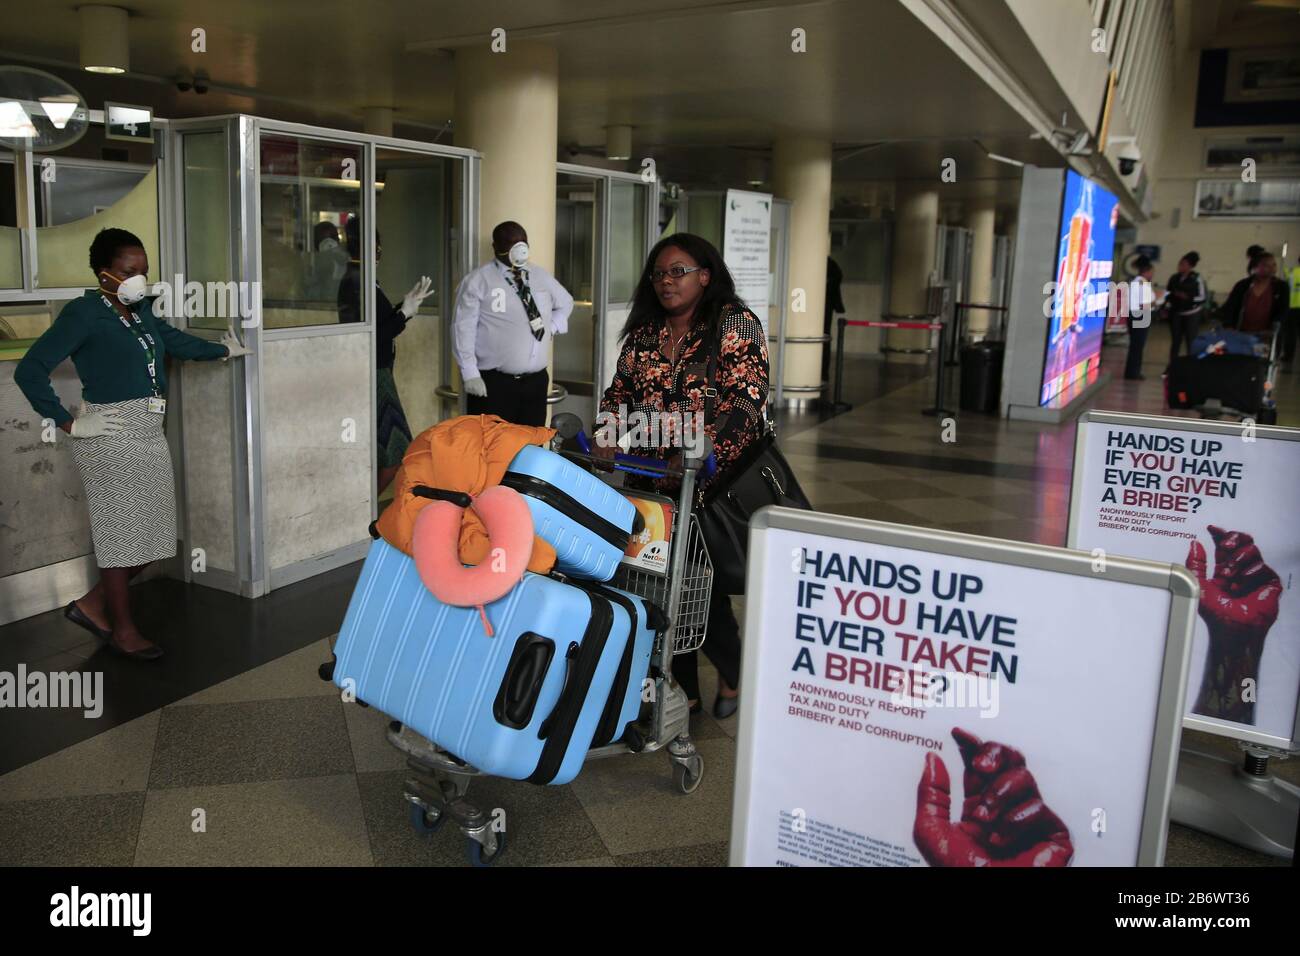 (200312) -- HARARE, March 12, 2020 (Xinhua) -- A passenger passes the customs check point at the Robert Gabriel Mugabe International Airport in Harare, Zimbabwe, March 11, 2020. Zimbabwe's main airport is '60 percent prepared' to deal with COVID-19 and more resources are required for training and procurement of essential protective equipment for critical staff, Ruth Labode, chairperson of the parliamentary portfolio committee on health said Wednesday, after touring the Robert Gabriel Mugabe International Airport in Harare to assess its preparedness to deal with the virus. (Photo by Shaun Jusa/ Stock Photo